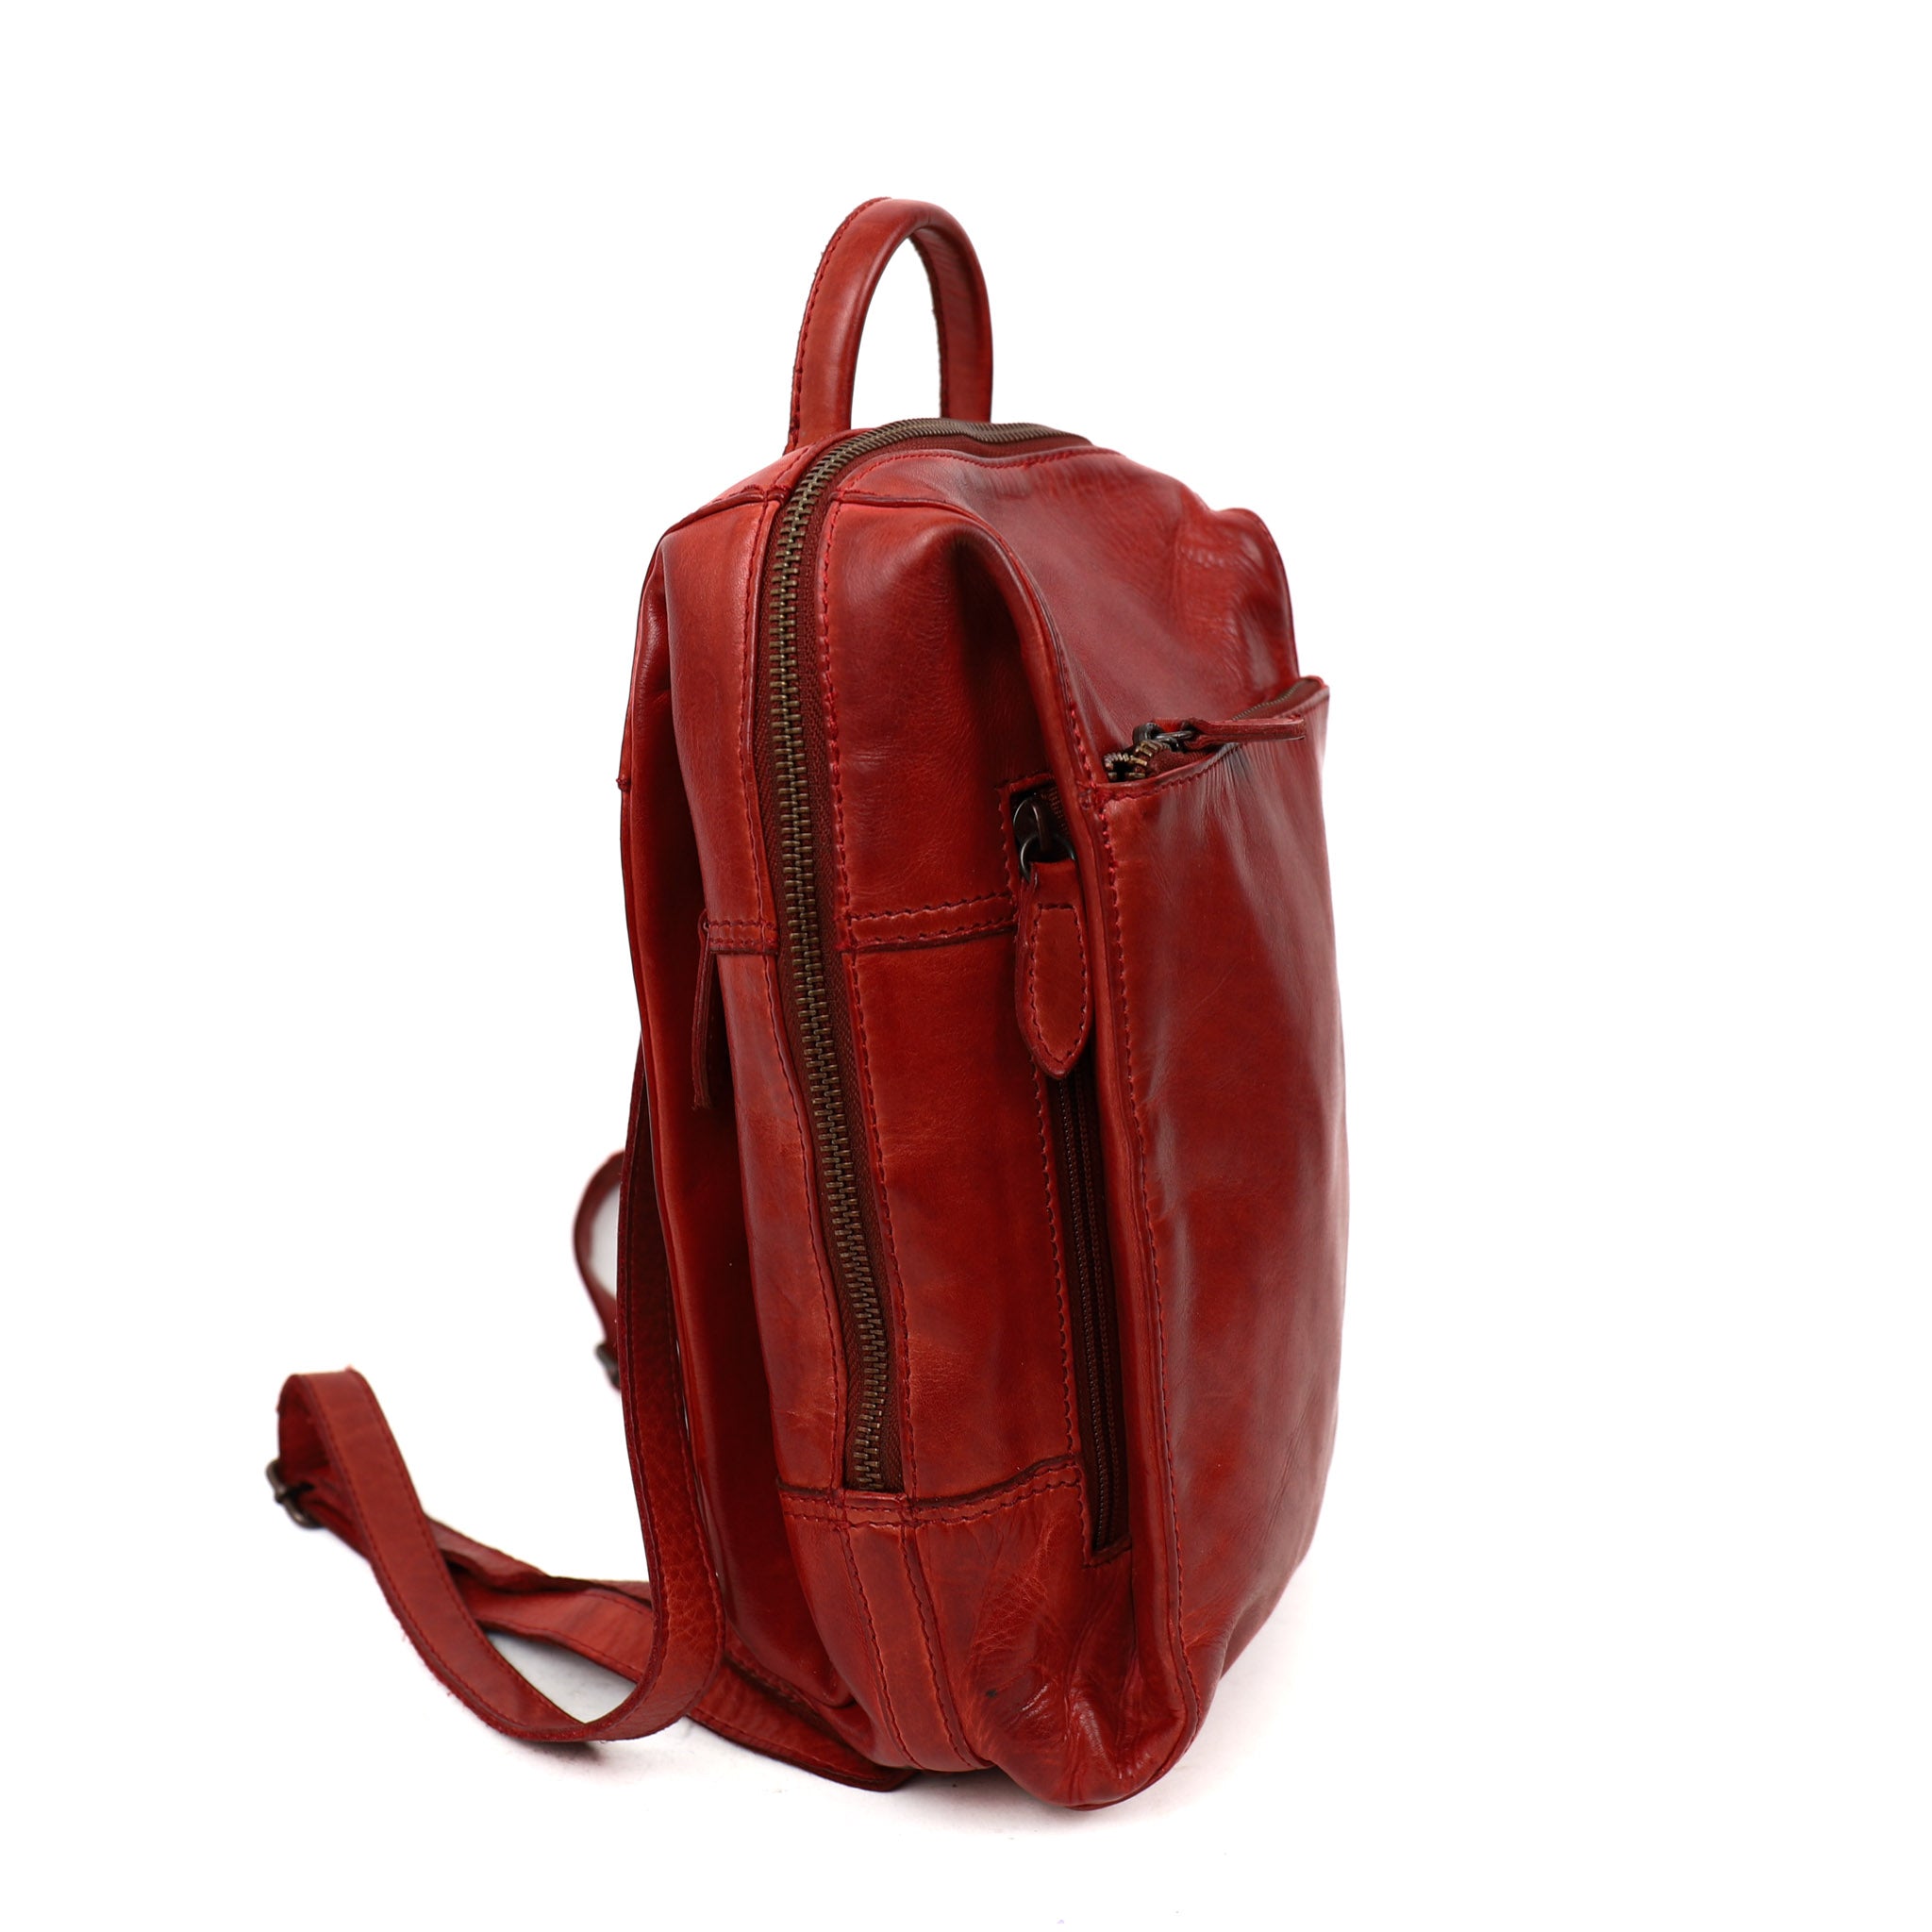 Backpack 'Sil' red